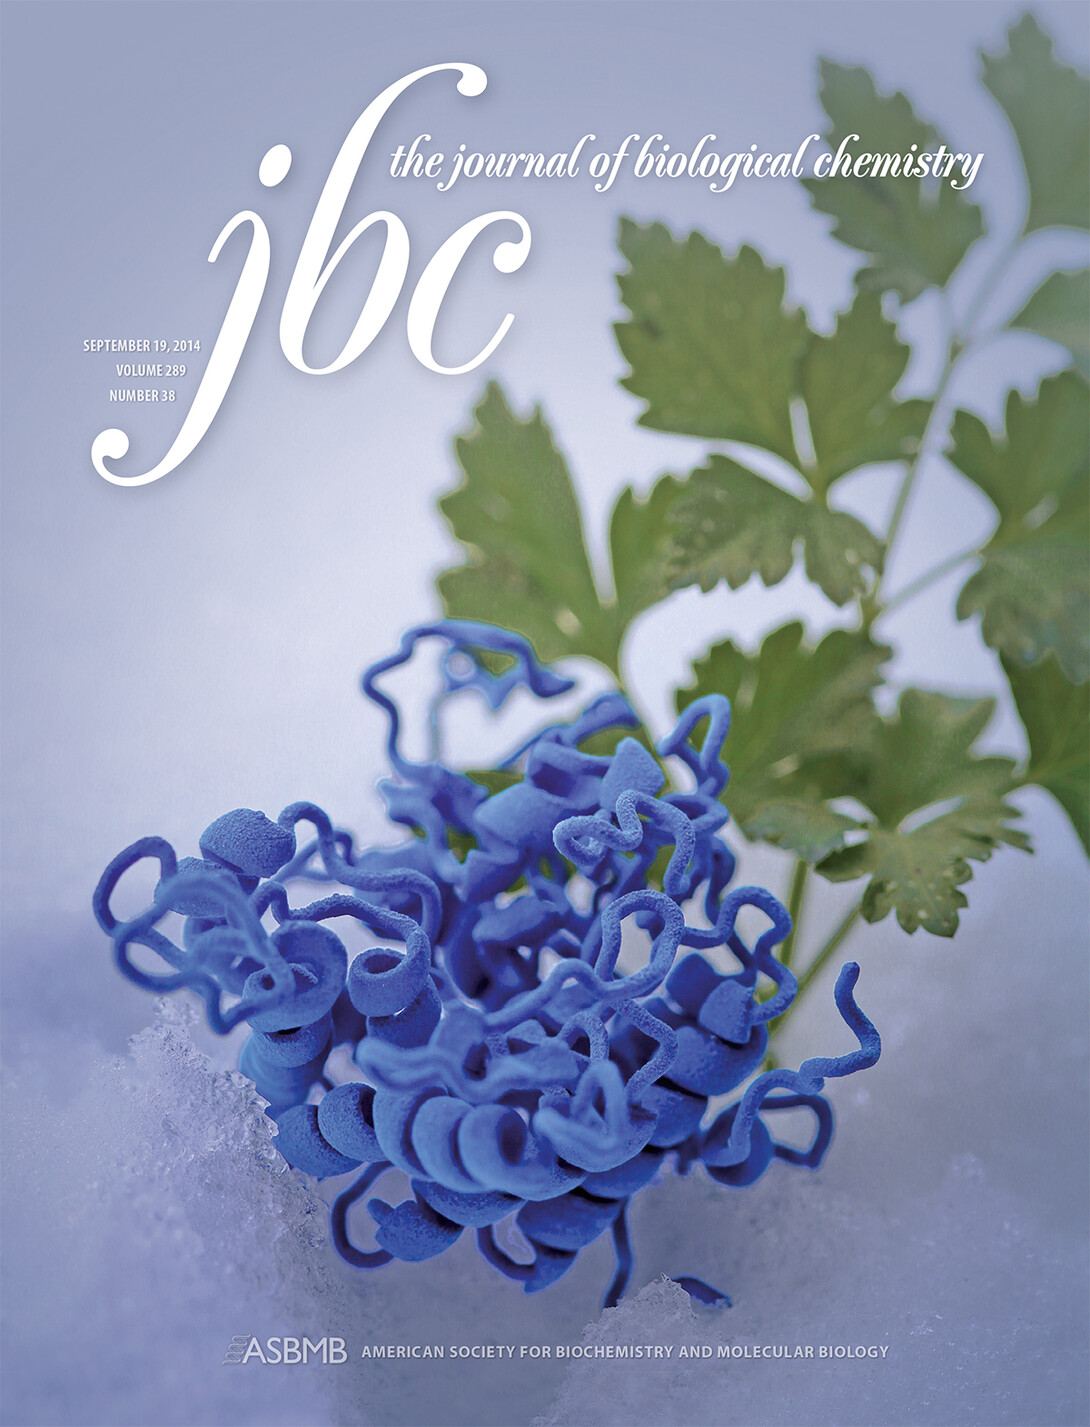 The cover article in the Sept. 19 edition of the Journal of Biological Chemistry features research led by UNL's Rebecca Roston.